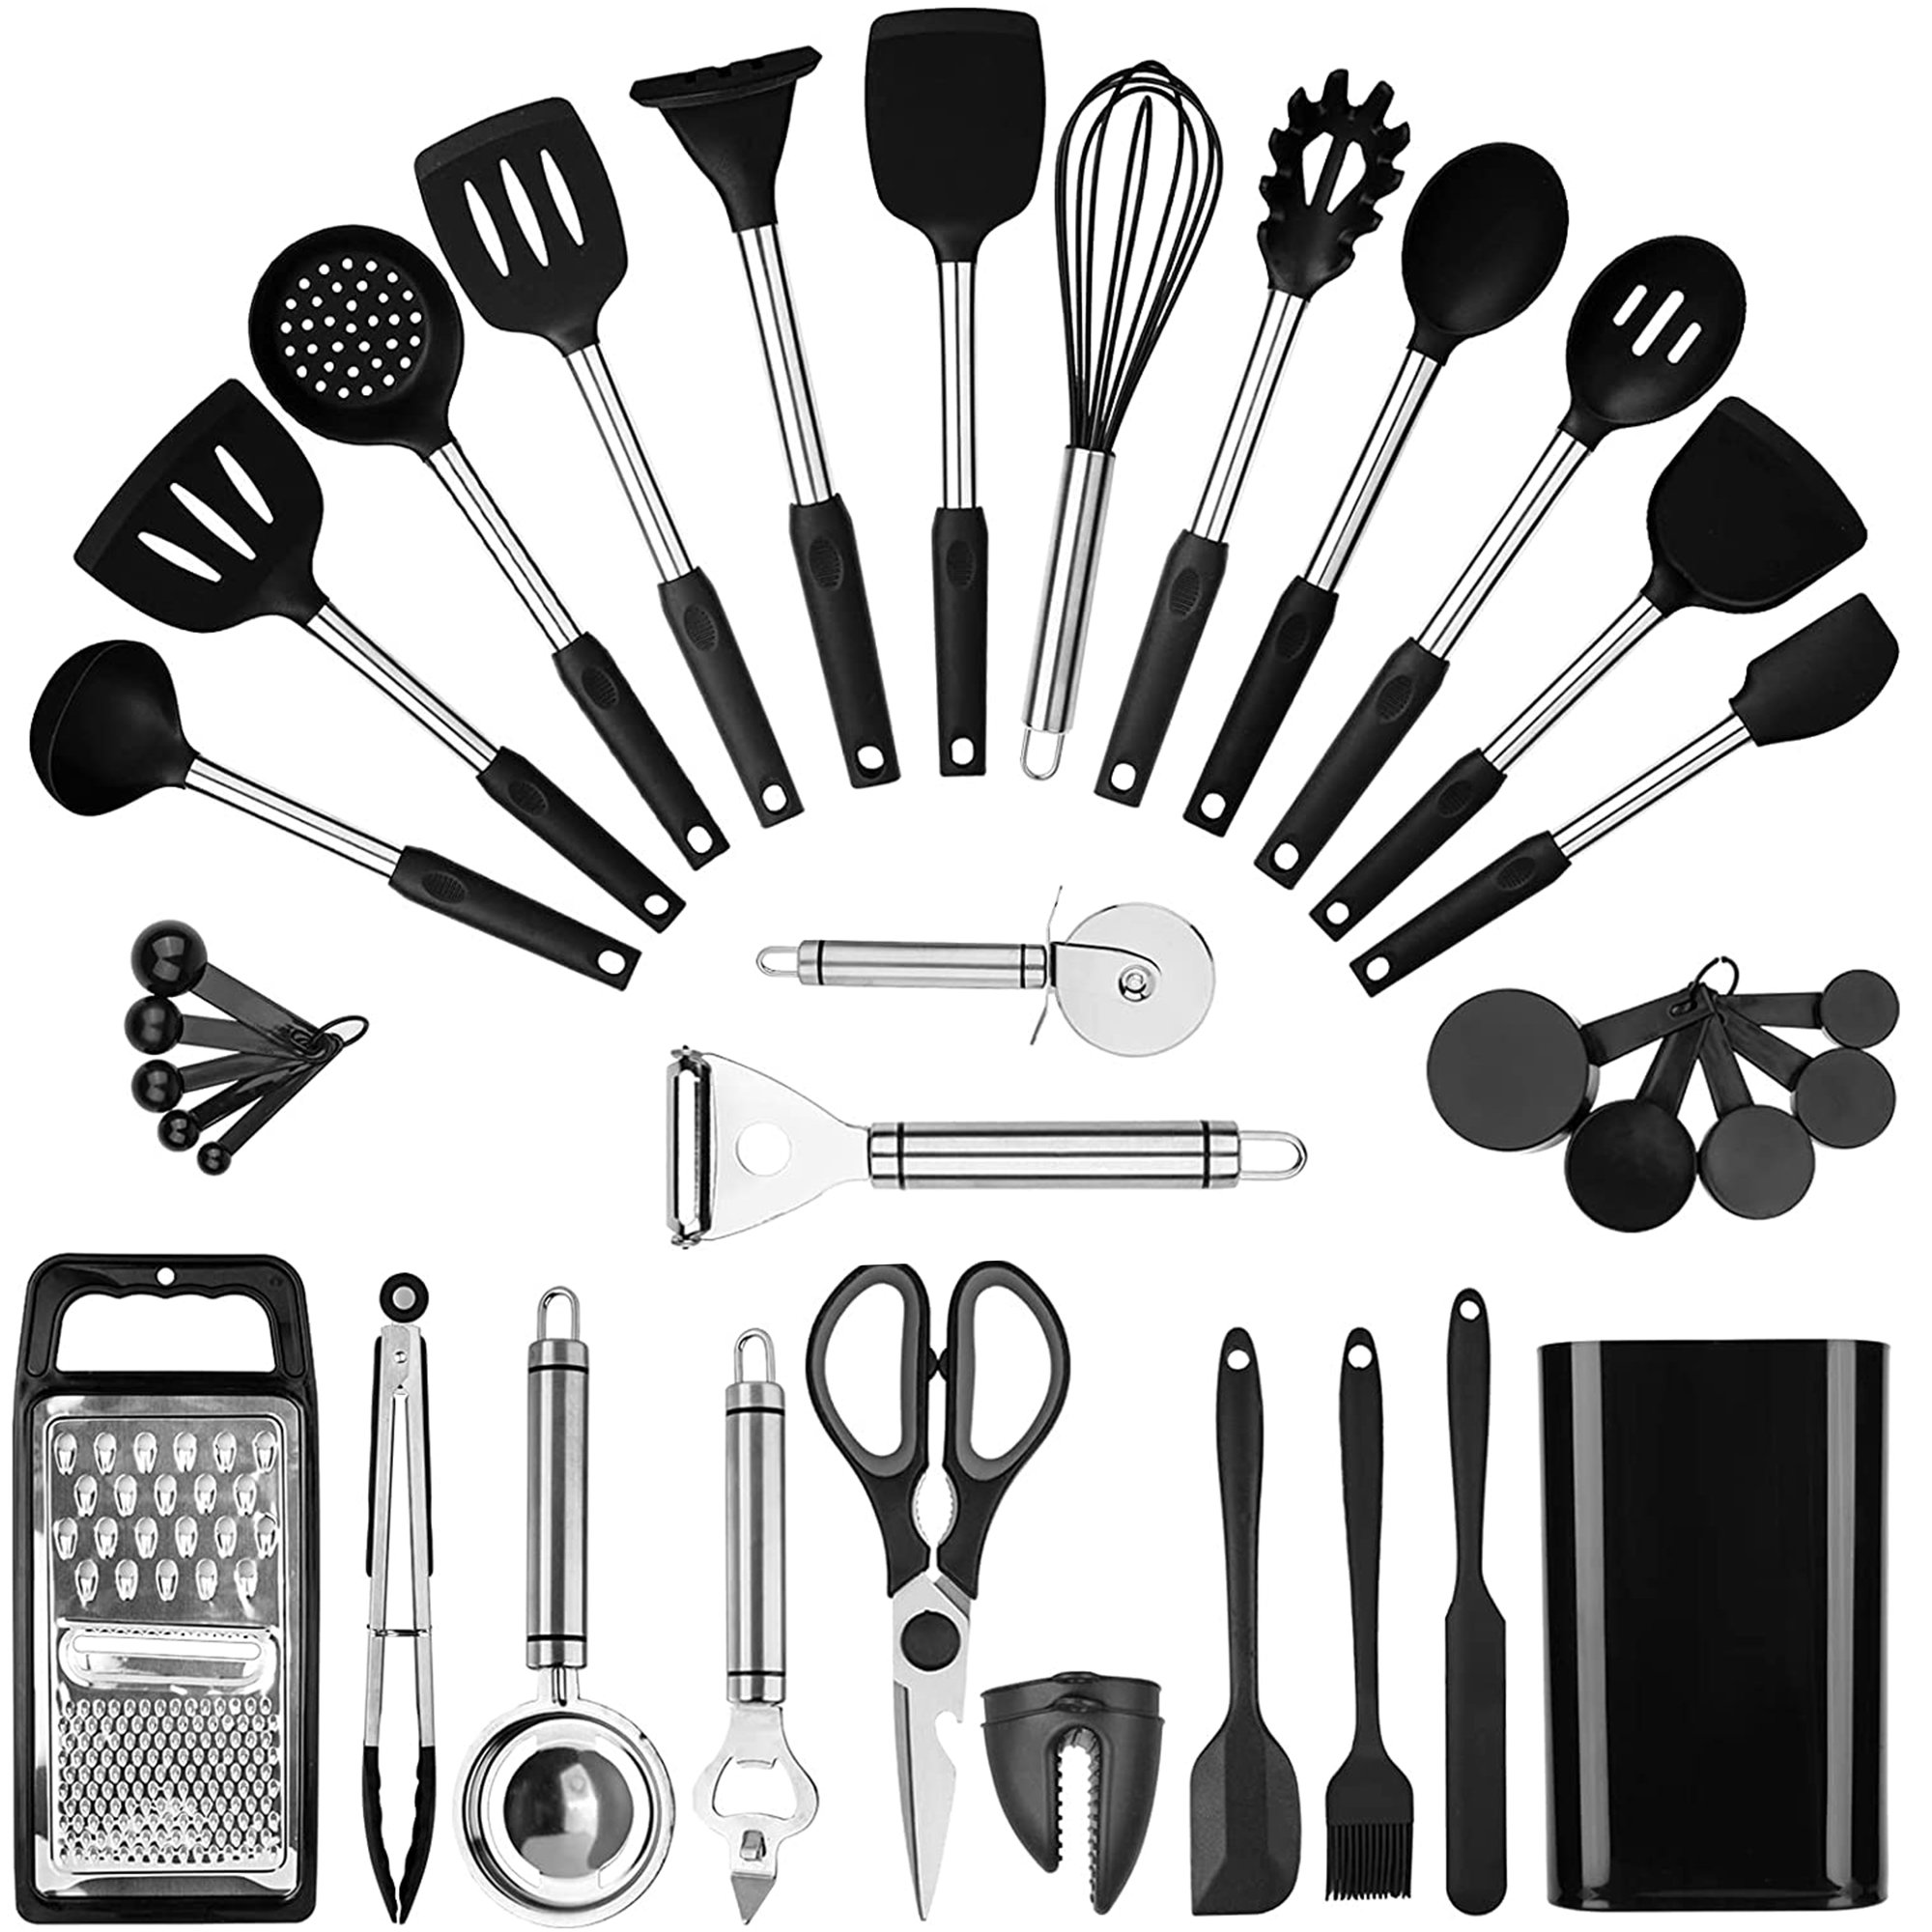 NEW Classic Farberware Cookware 17-Piece Kitchen Tool and Gadget Set